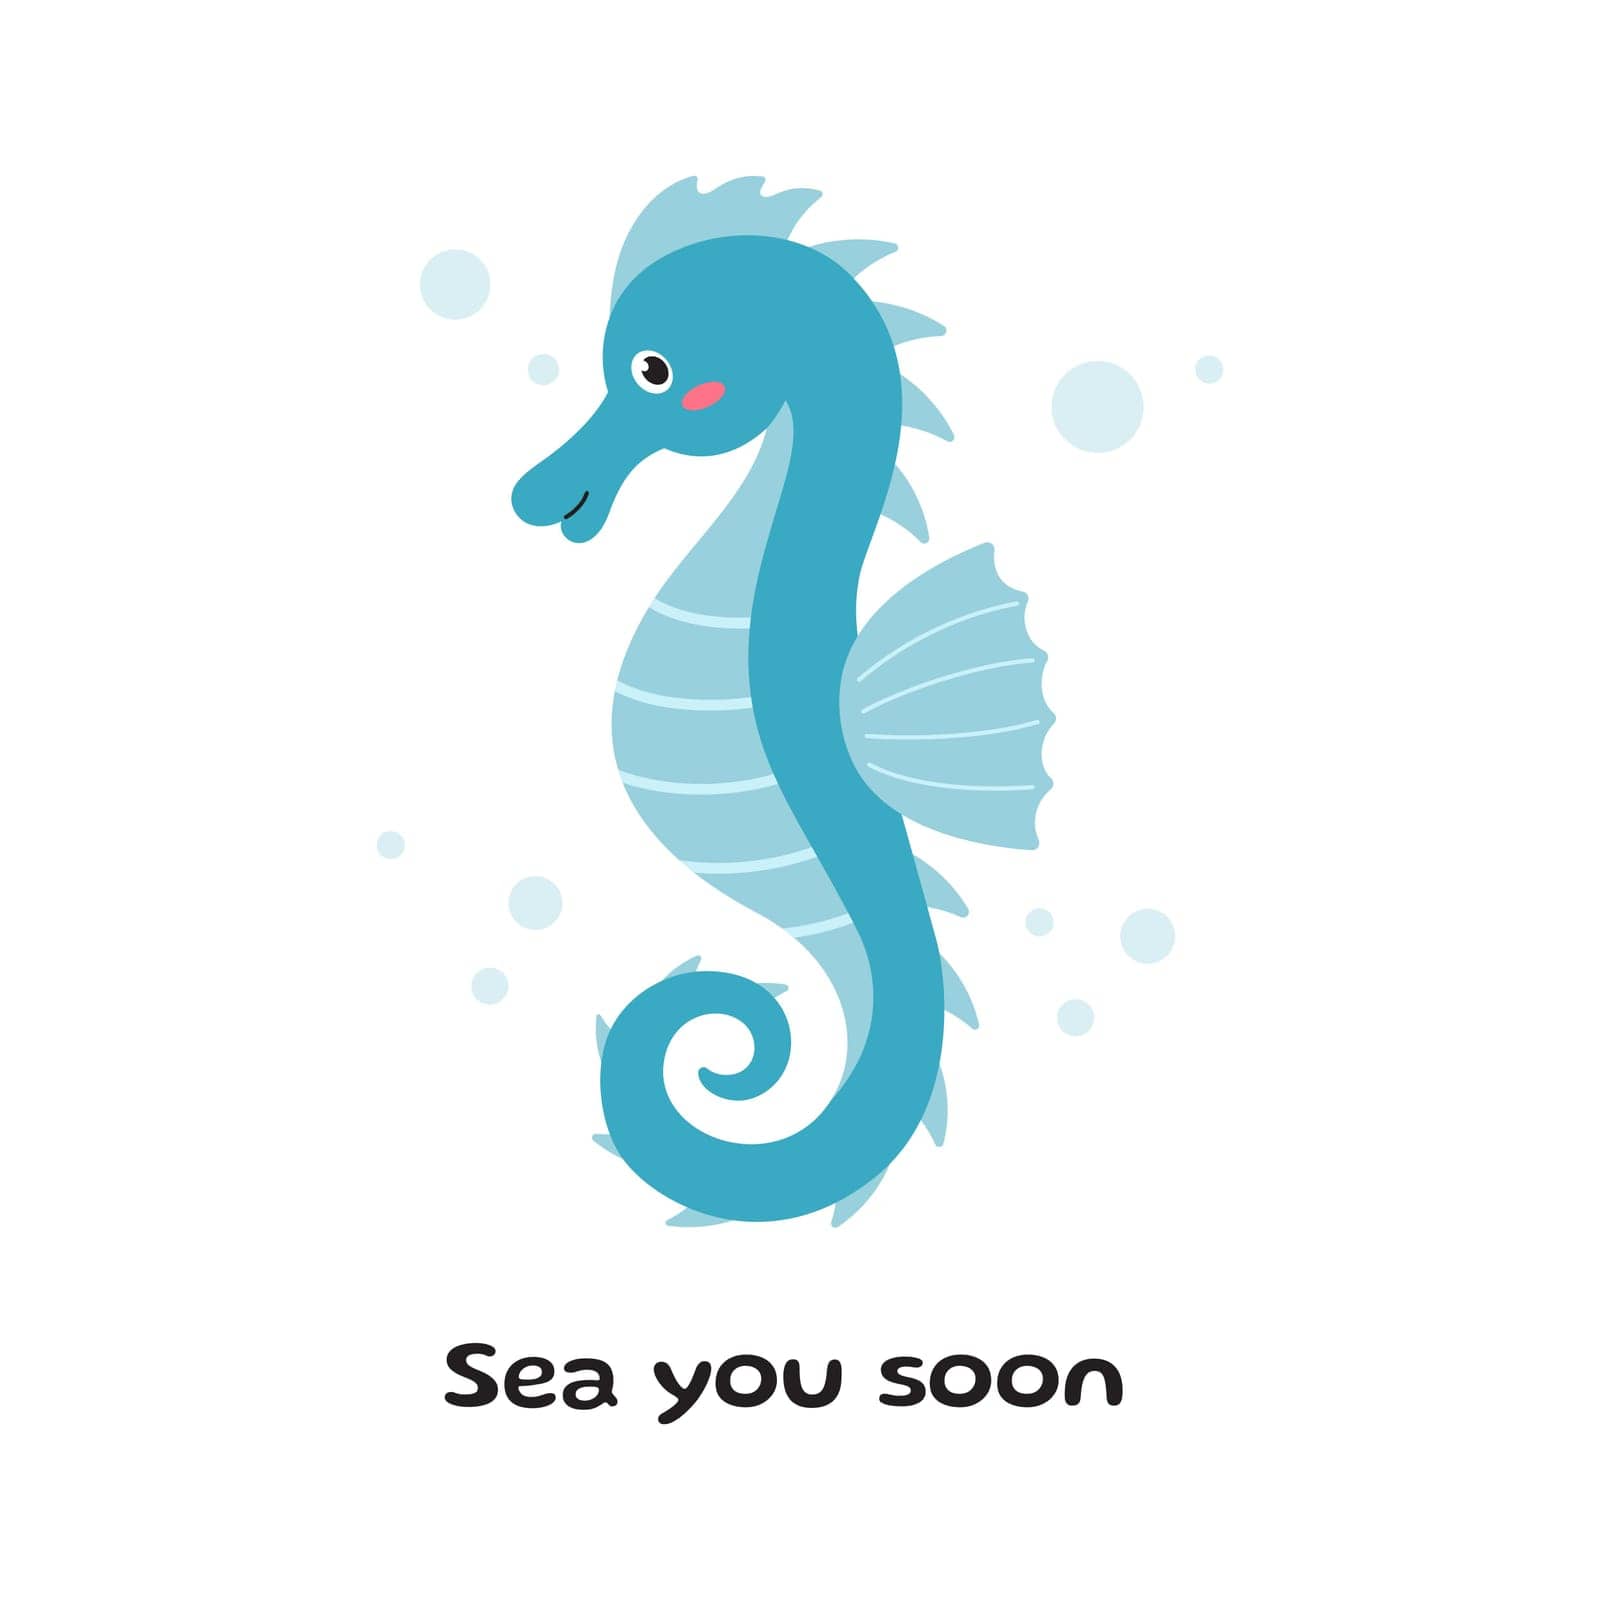 Cute cartoon sea Horse. Postcard with hippocampus character. Vector illustration. Kids illustration in cartoon style by KateArtery19